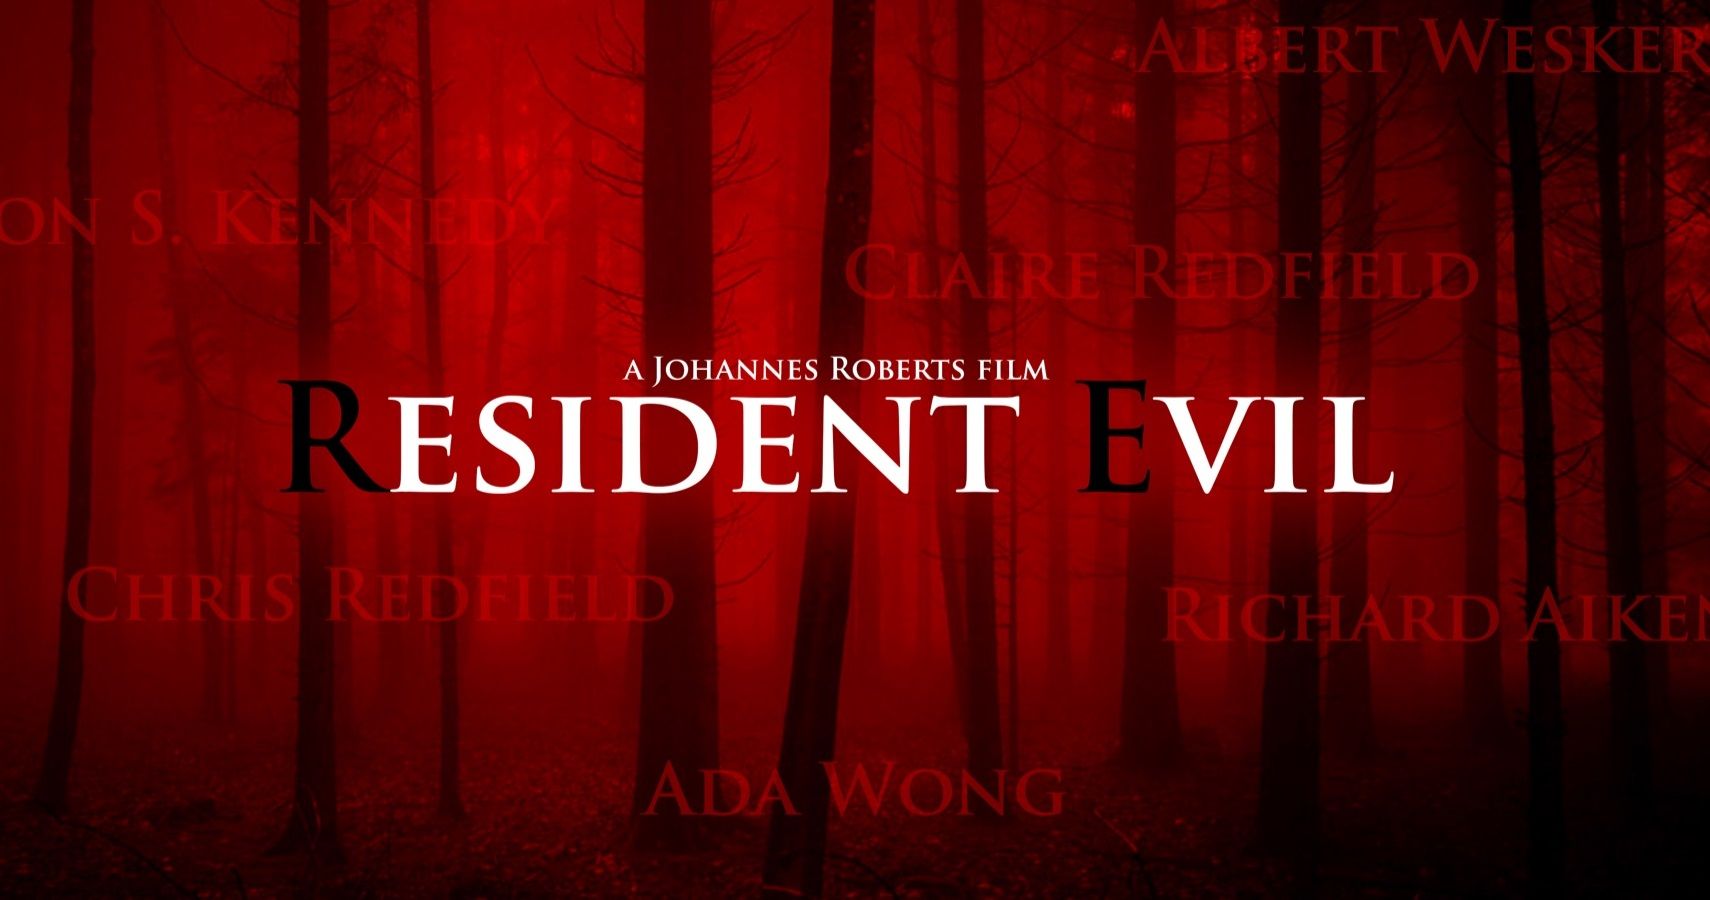 Sony's Resident Evil reboot movie poster shows the character's names, from Ada Wong to Chris Redfield